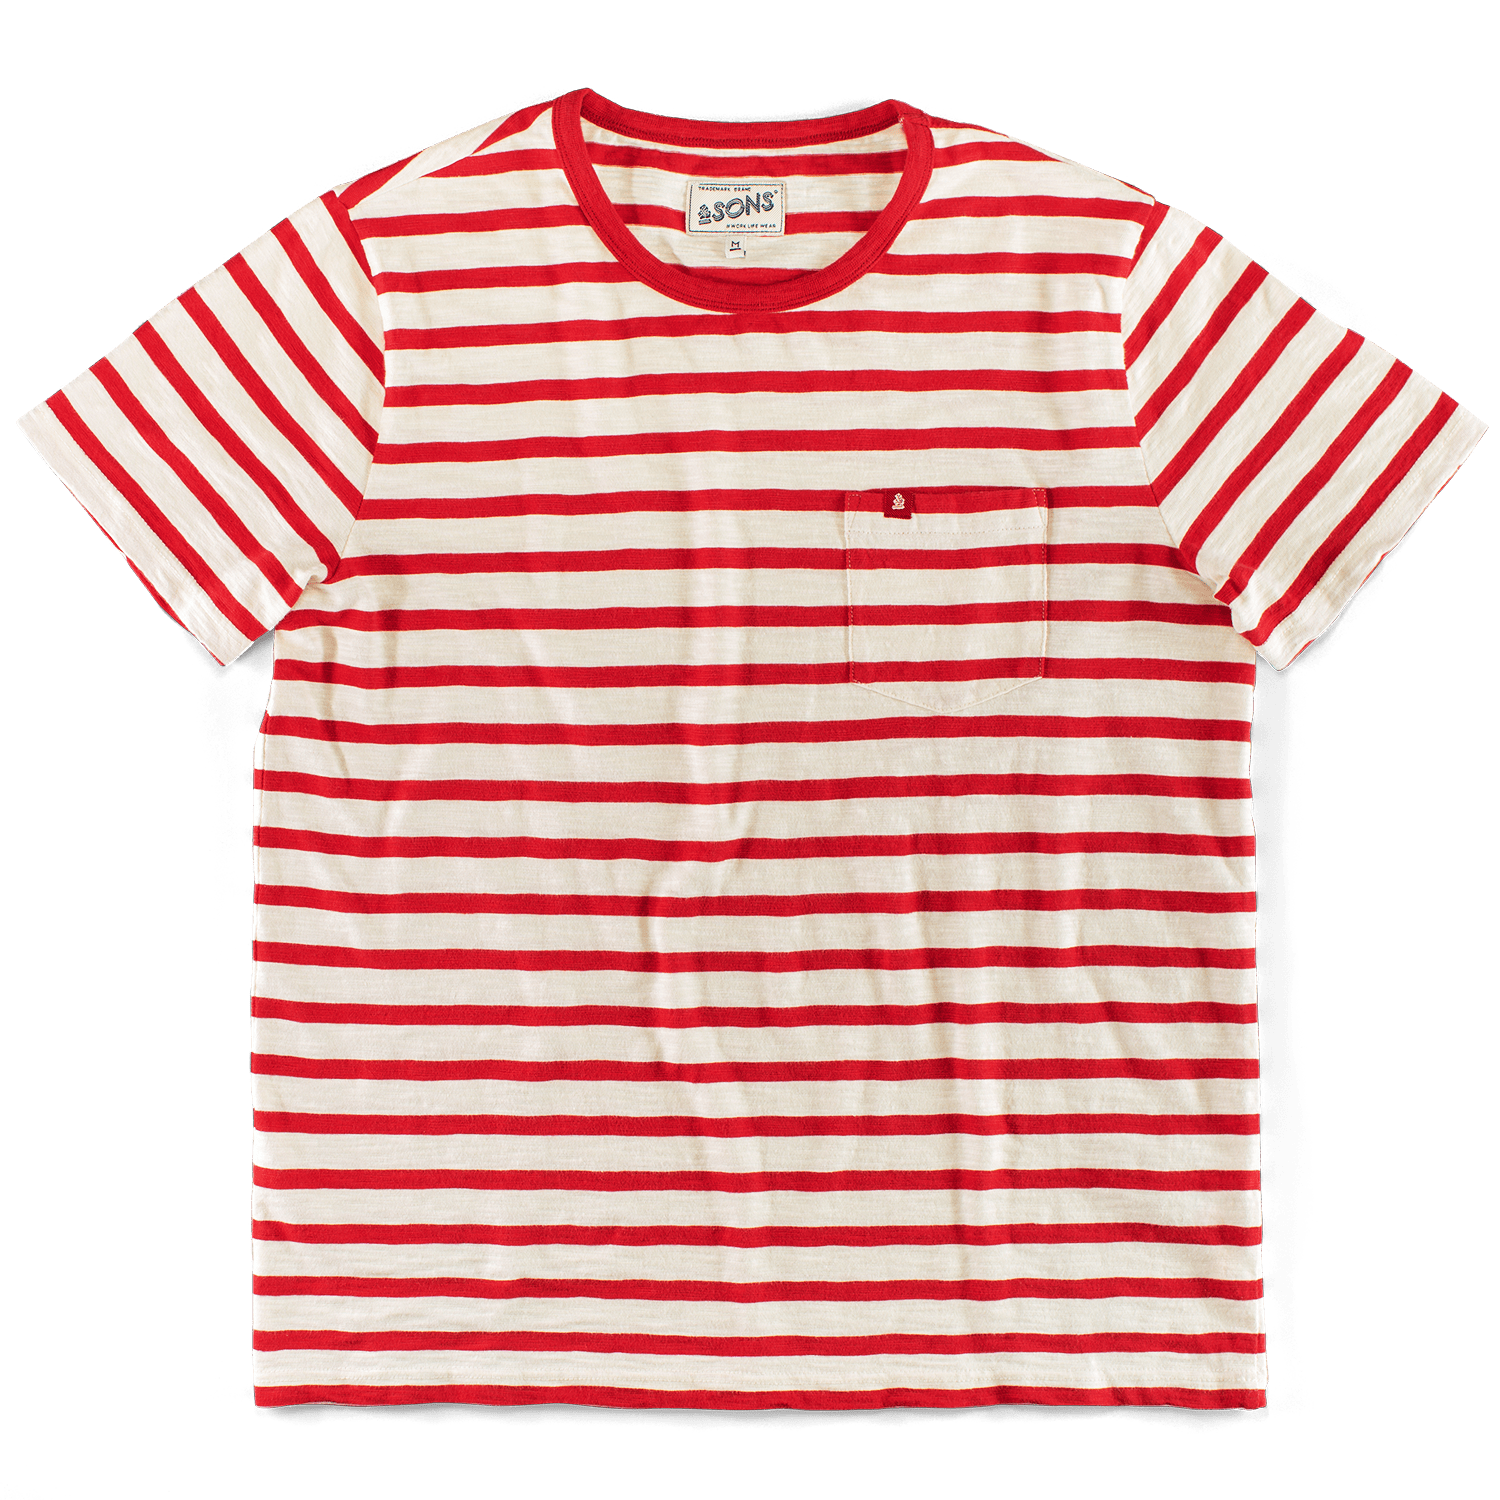 Men's Breton Striped T Shirt Red Small &SONS Trading Co